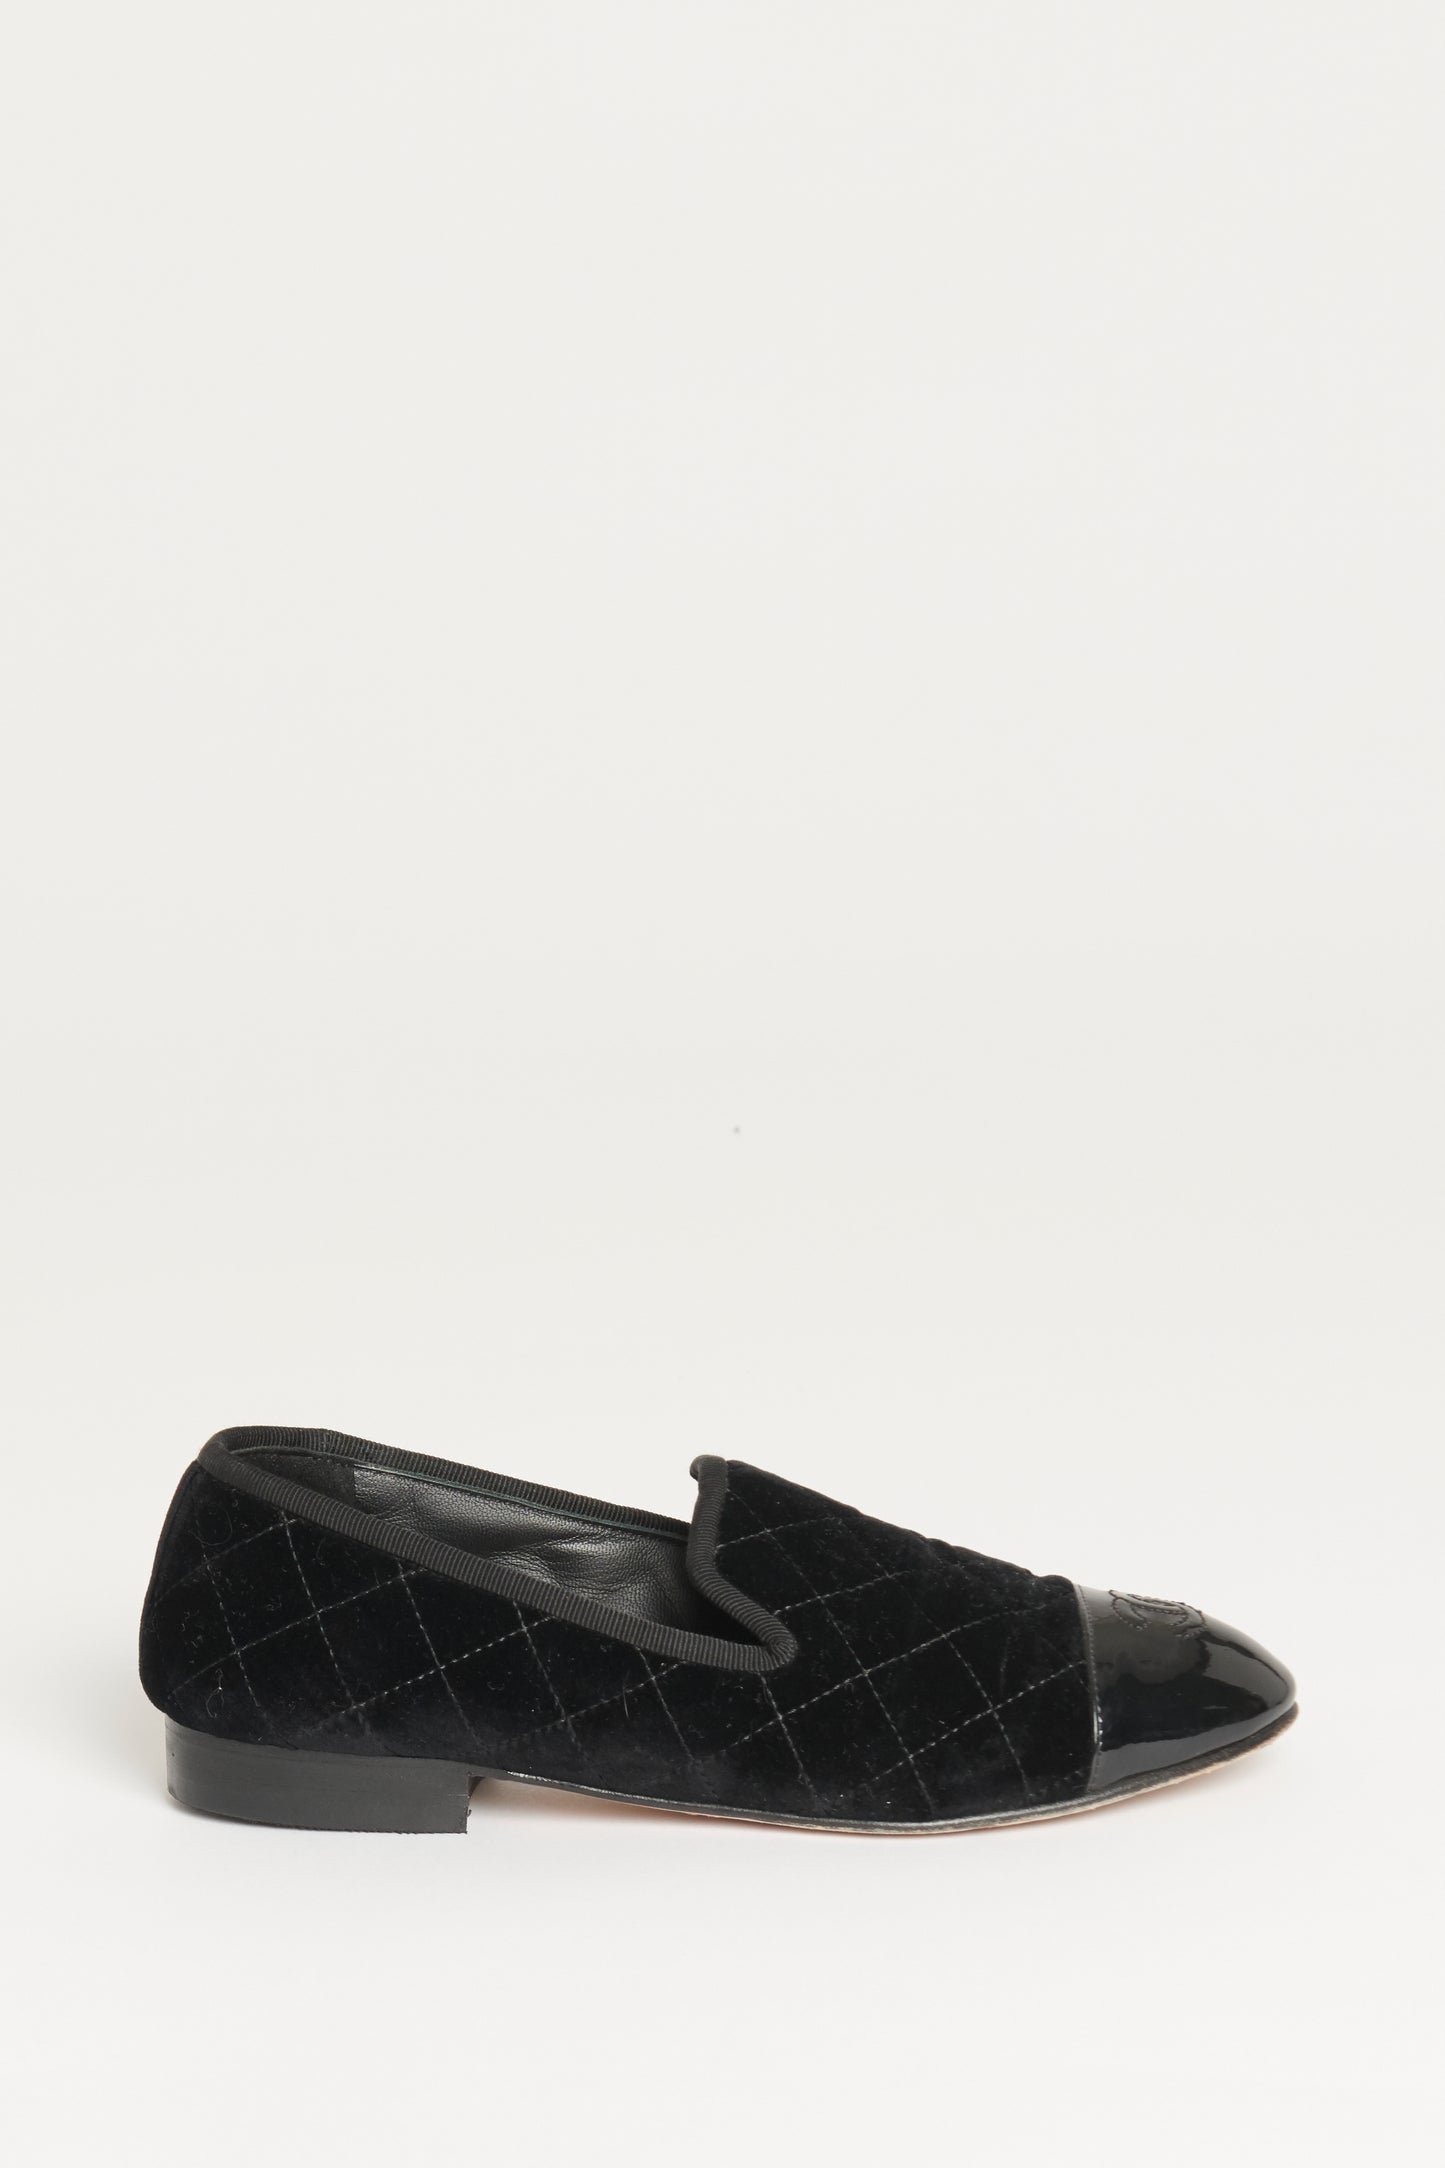 Black Velvet and Patent Leather Preowned Loafers